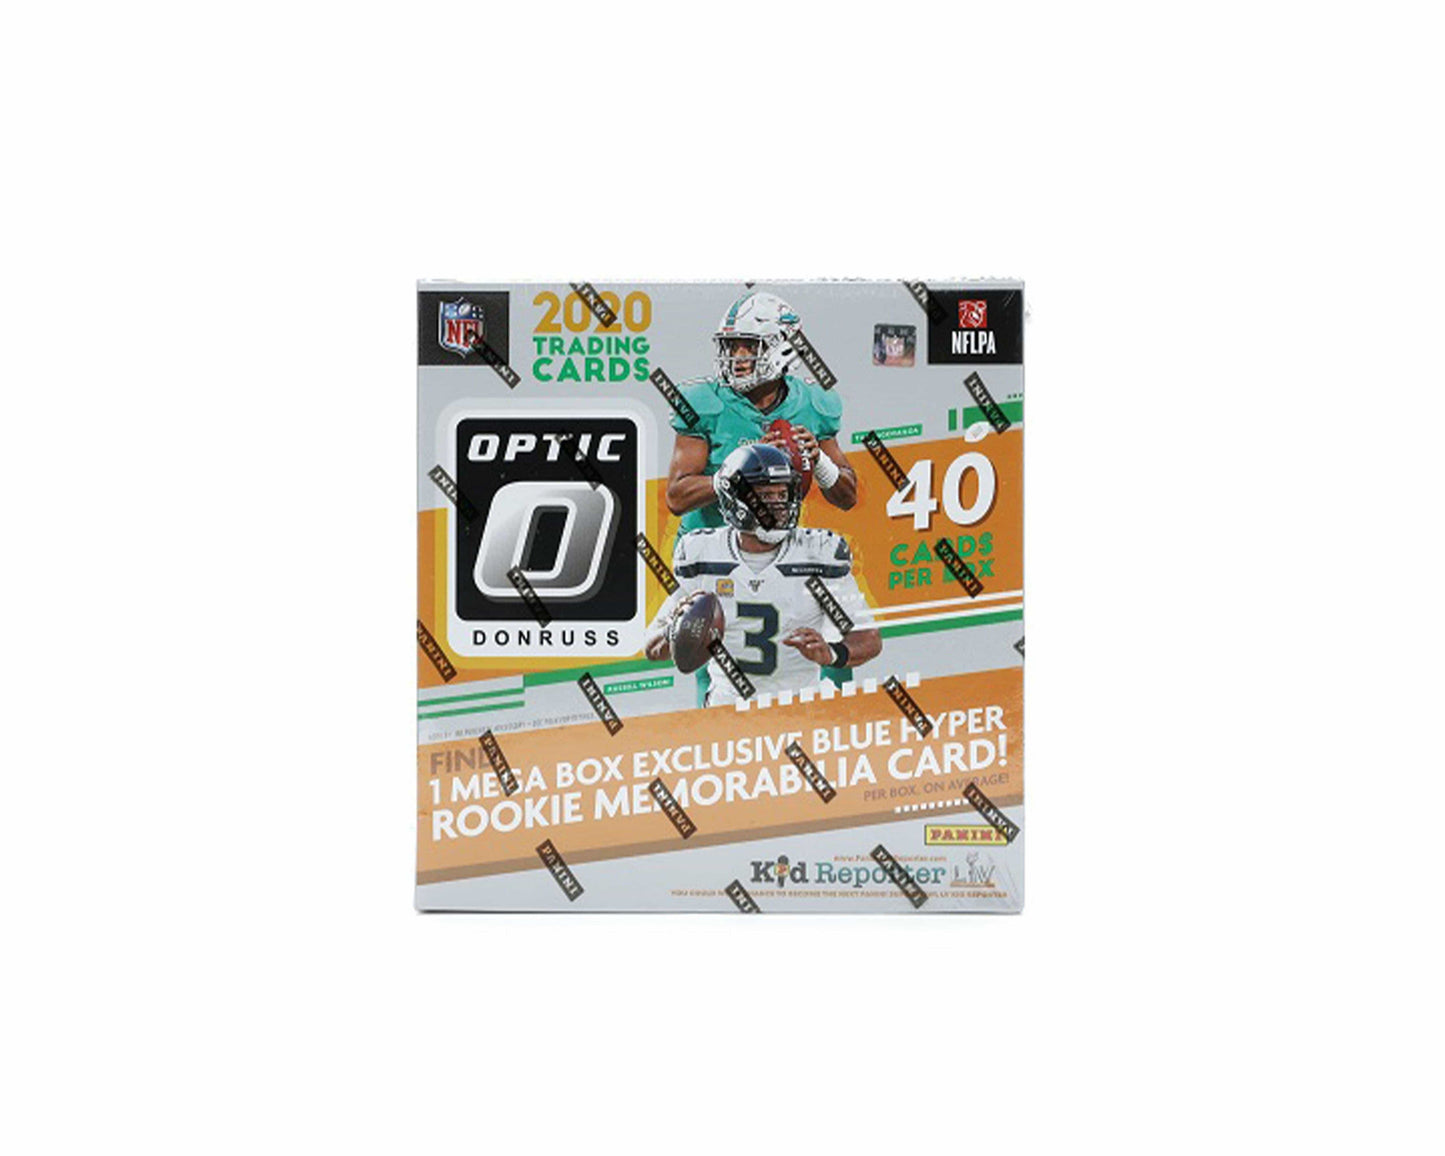 2020 Panini Donruss Optic Football Mega Box Blue Hyper Parallels - Only at www.Ballersclubkickz.com - Back with its updated chromium look and Rated Rookies subset, 2020 Panini Donruss Optic Football offers fans hobby and retail versions of the popular set. The 2020 NFL rookie class, which includes Justin Herbert, Joe Burrow, Chase Young, and Justin Jefferson, headlines the set. The base checklist is 200 cards deep, 50 of which are the classic Rated Rookies subset.